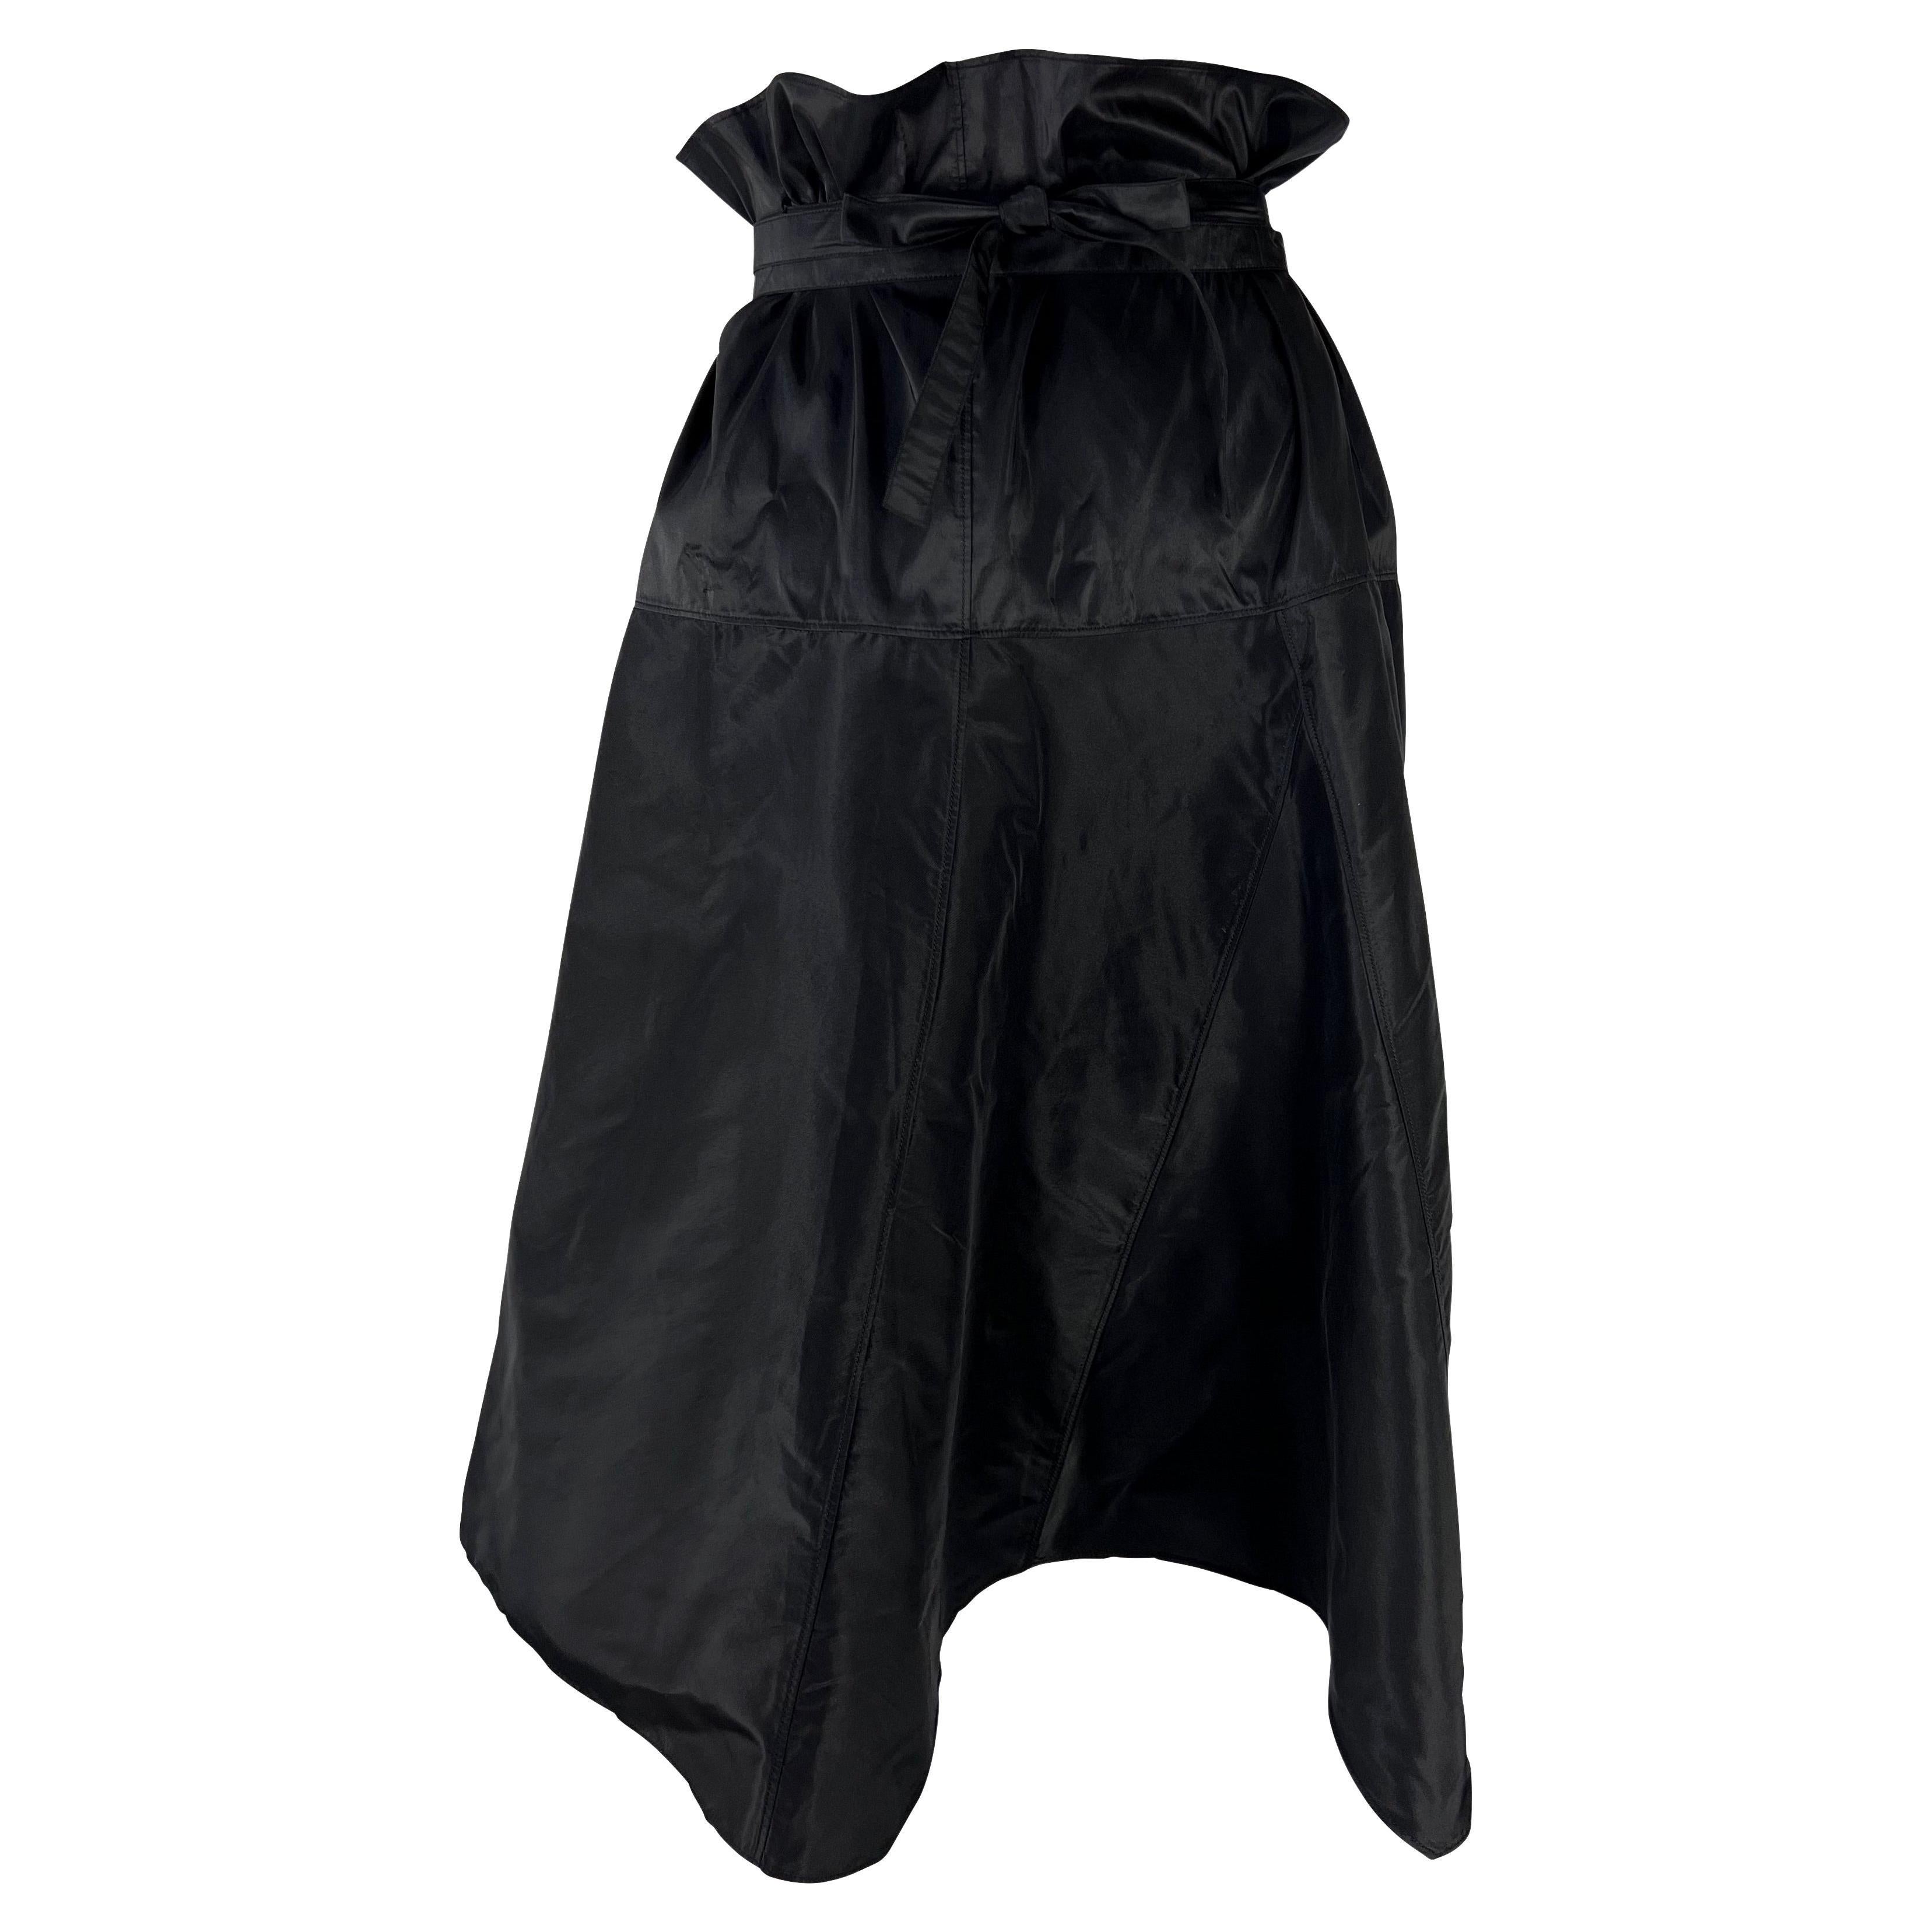 S/S 2002 Gucci by Tom Ford Runway Black Silk Taffeta Belted Wrap Oversized Skirt For Sale